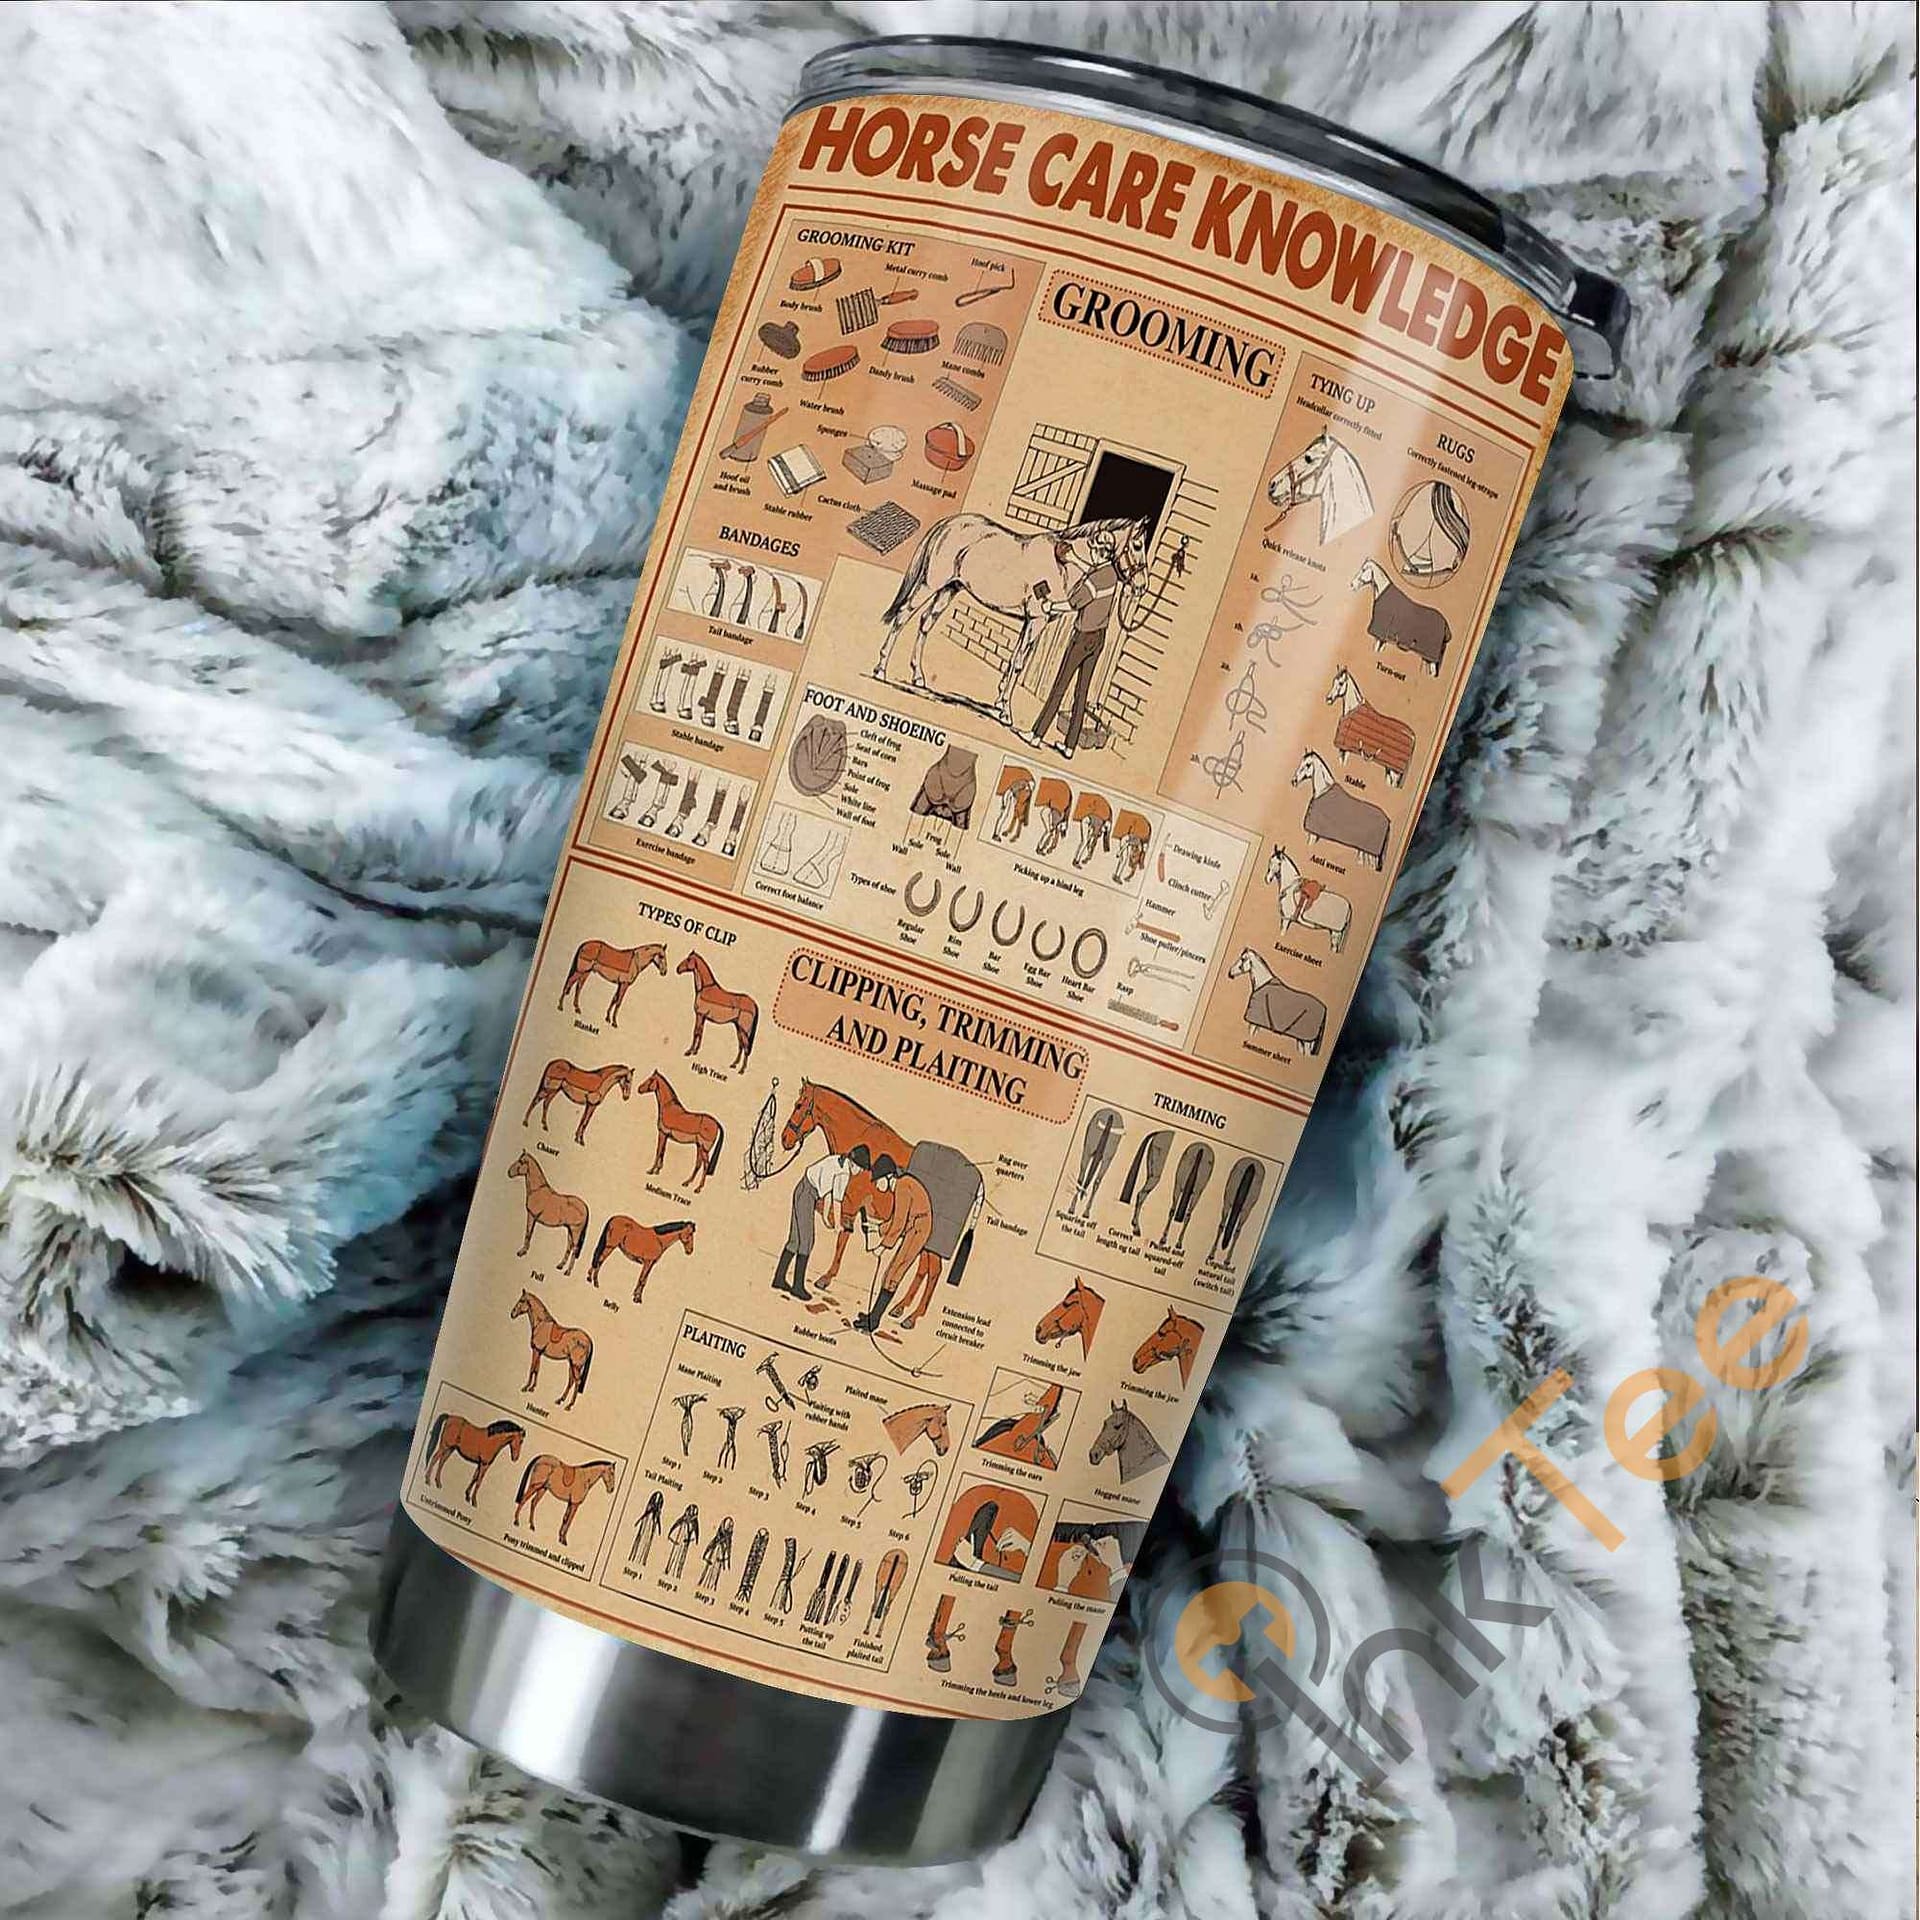 Horse Care Knowledge Amazon Best Seller Sku 2916 Stainless Steel Tumbler